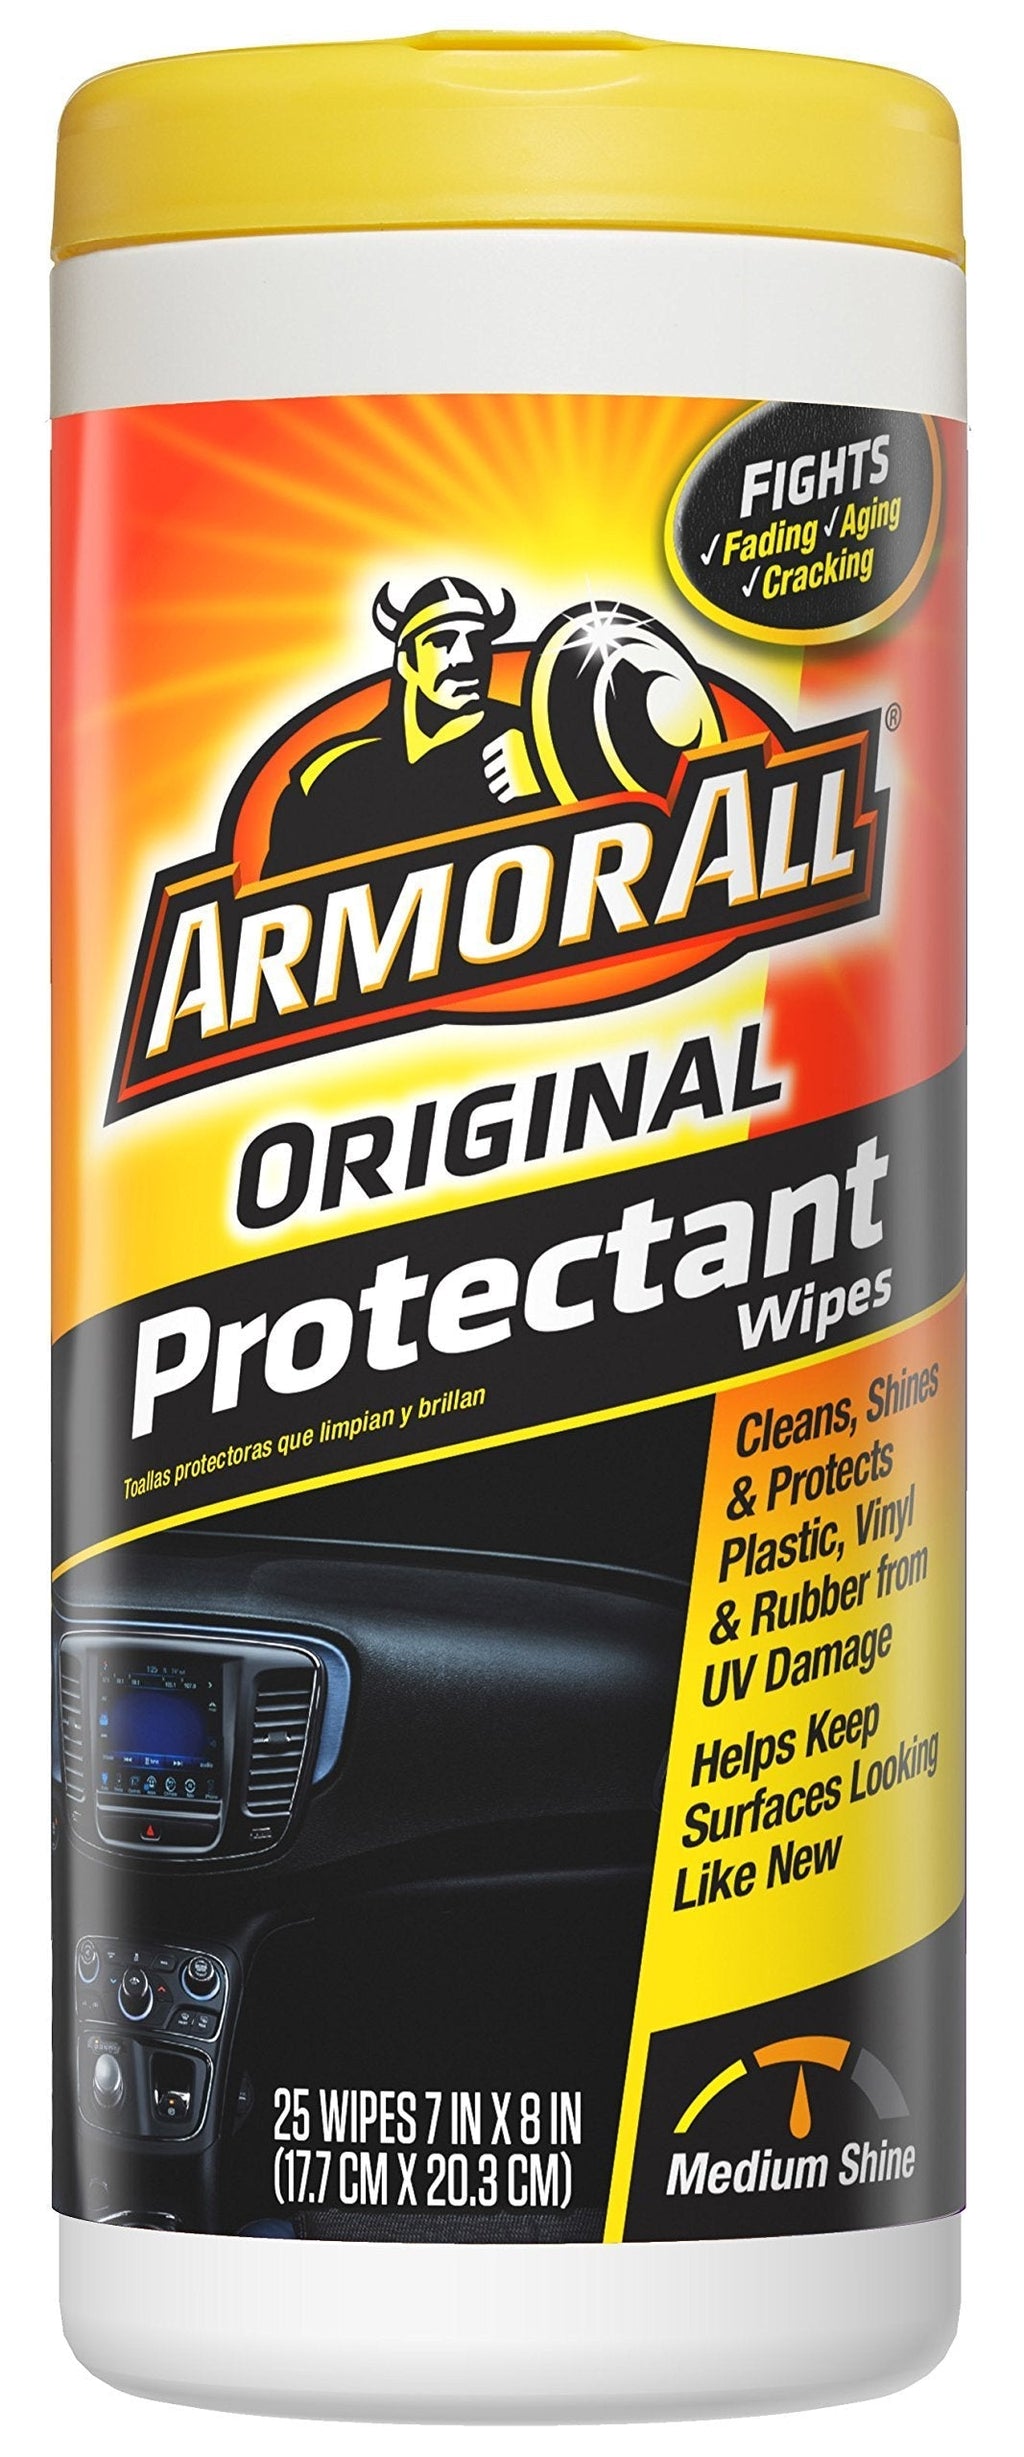  [AUSTRALIA] - Armor All Original Protectant Wipes (25 count) Old Style (25 Count)